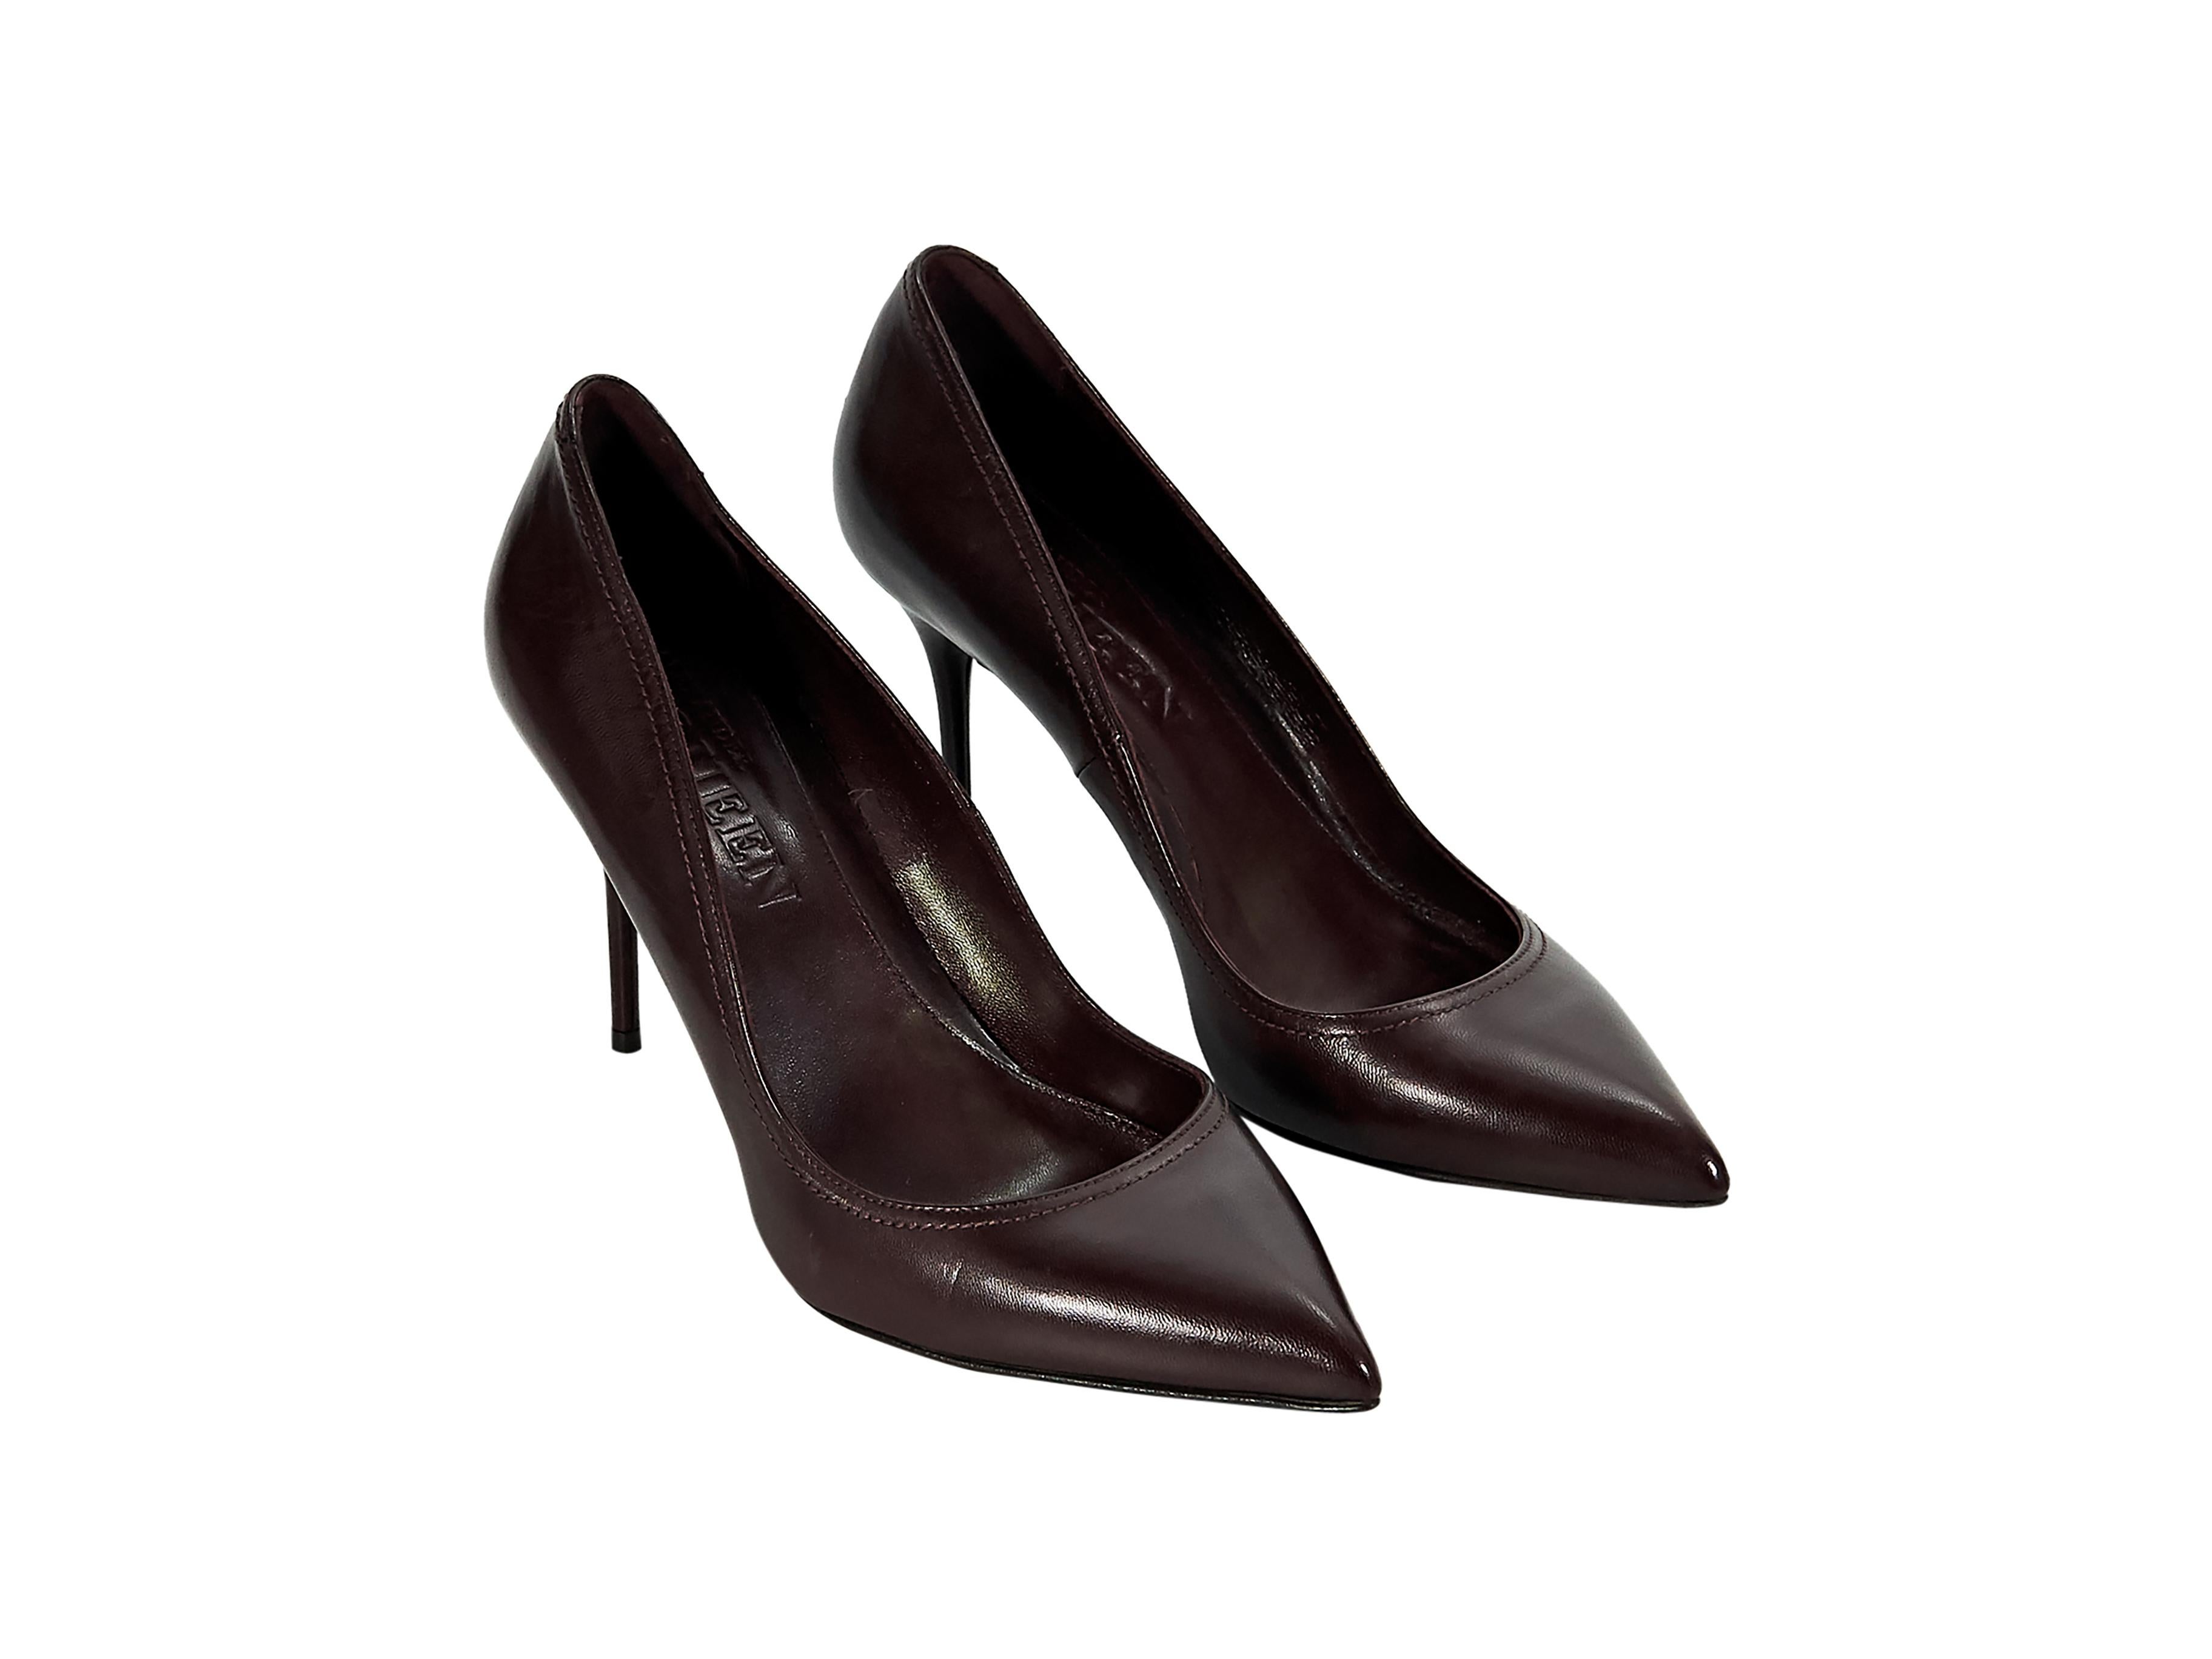 Product details:  Burgundy leather pumps by Alexander McQueen.  Point toe.  Slip-on style.  3.5